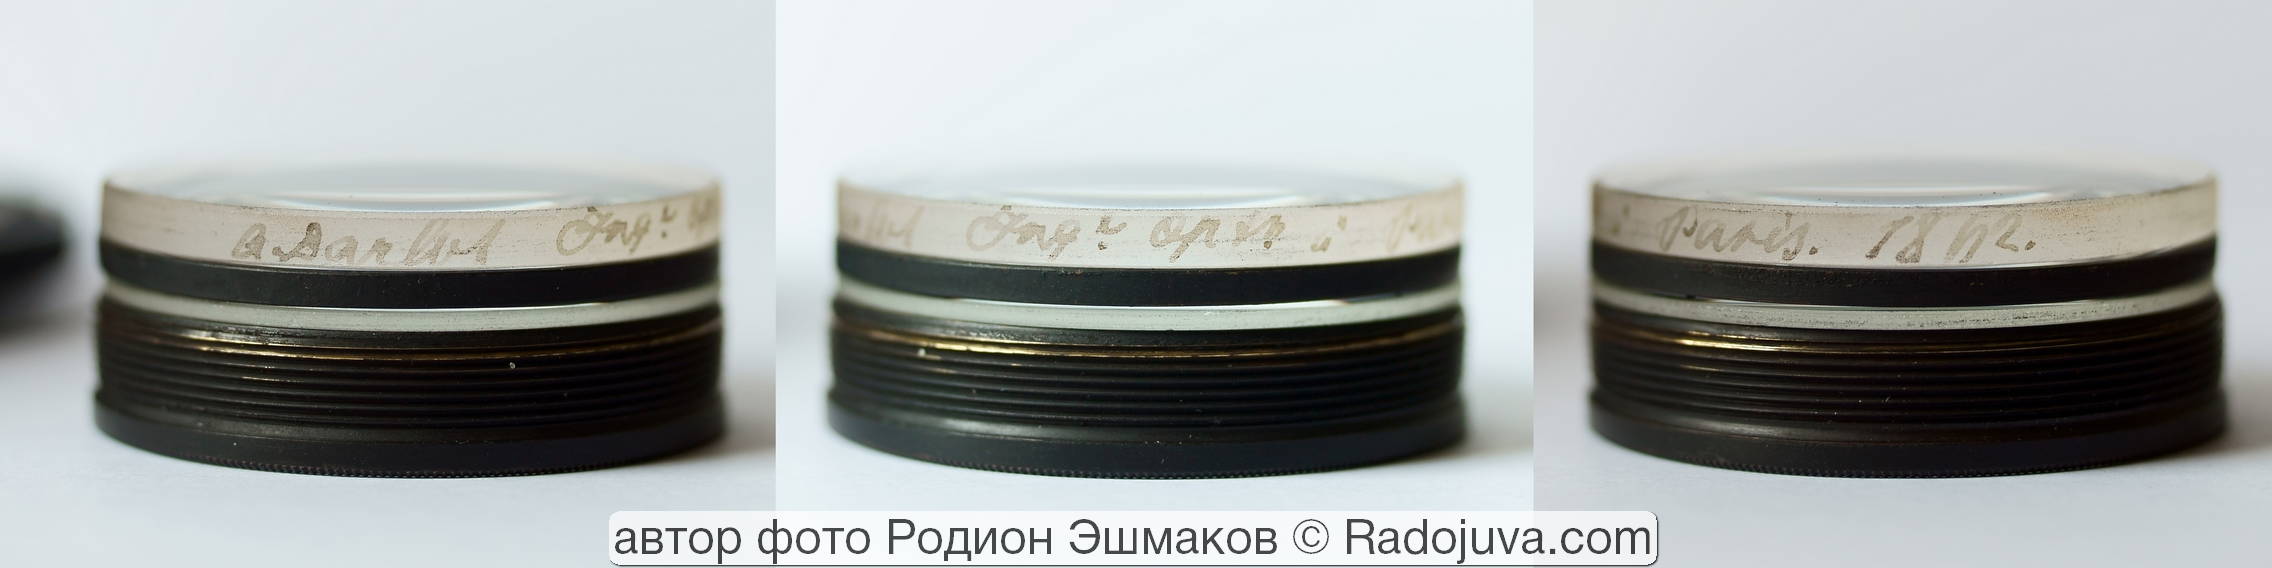 Petzval 180 mm f / 4.5 (A. Darlot, Paris, 1862). Review from the 